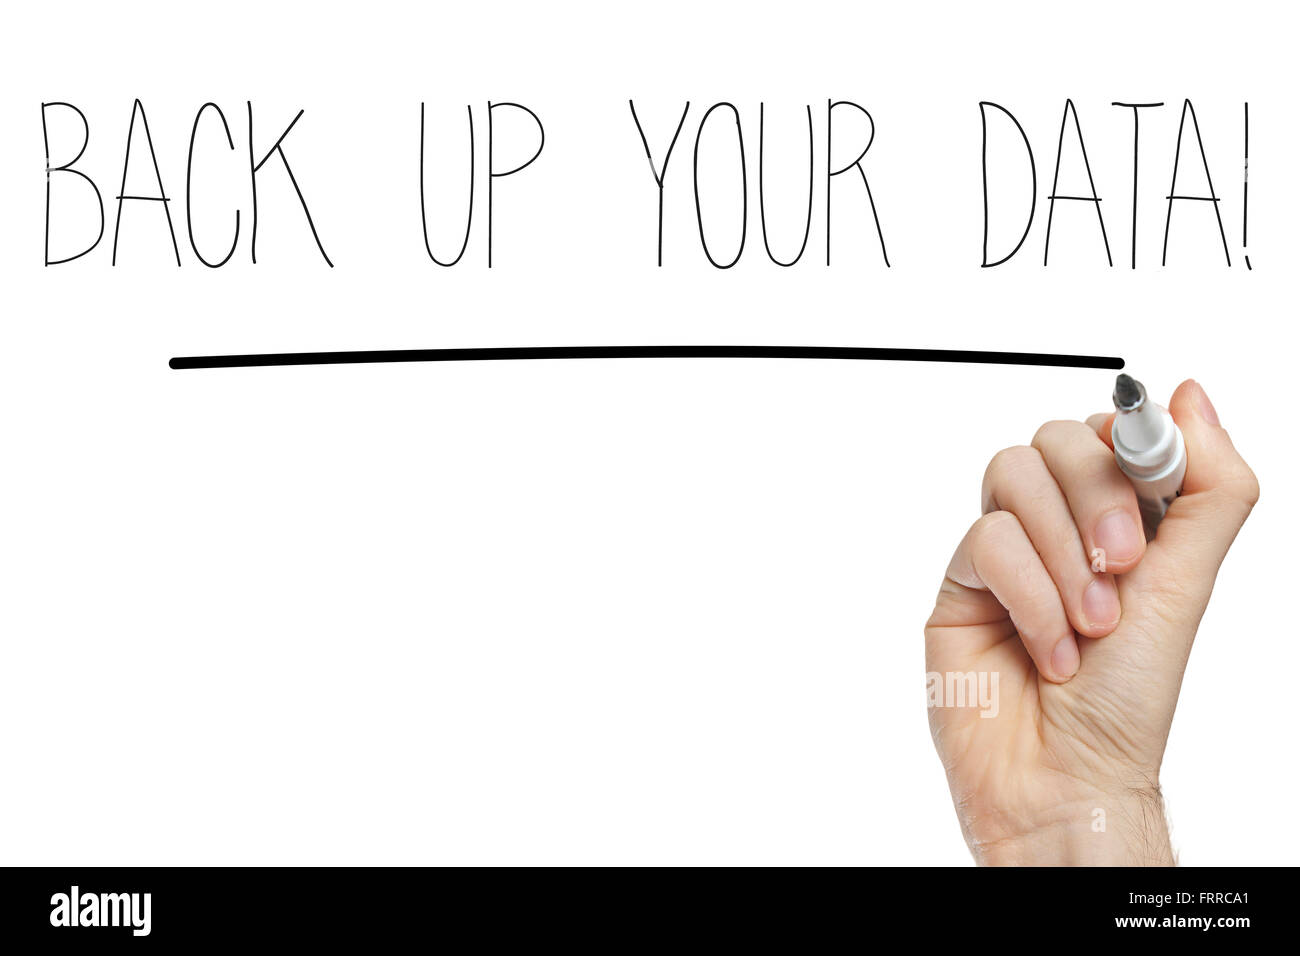 Hand writing back up your data on a white board Stock Photo